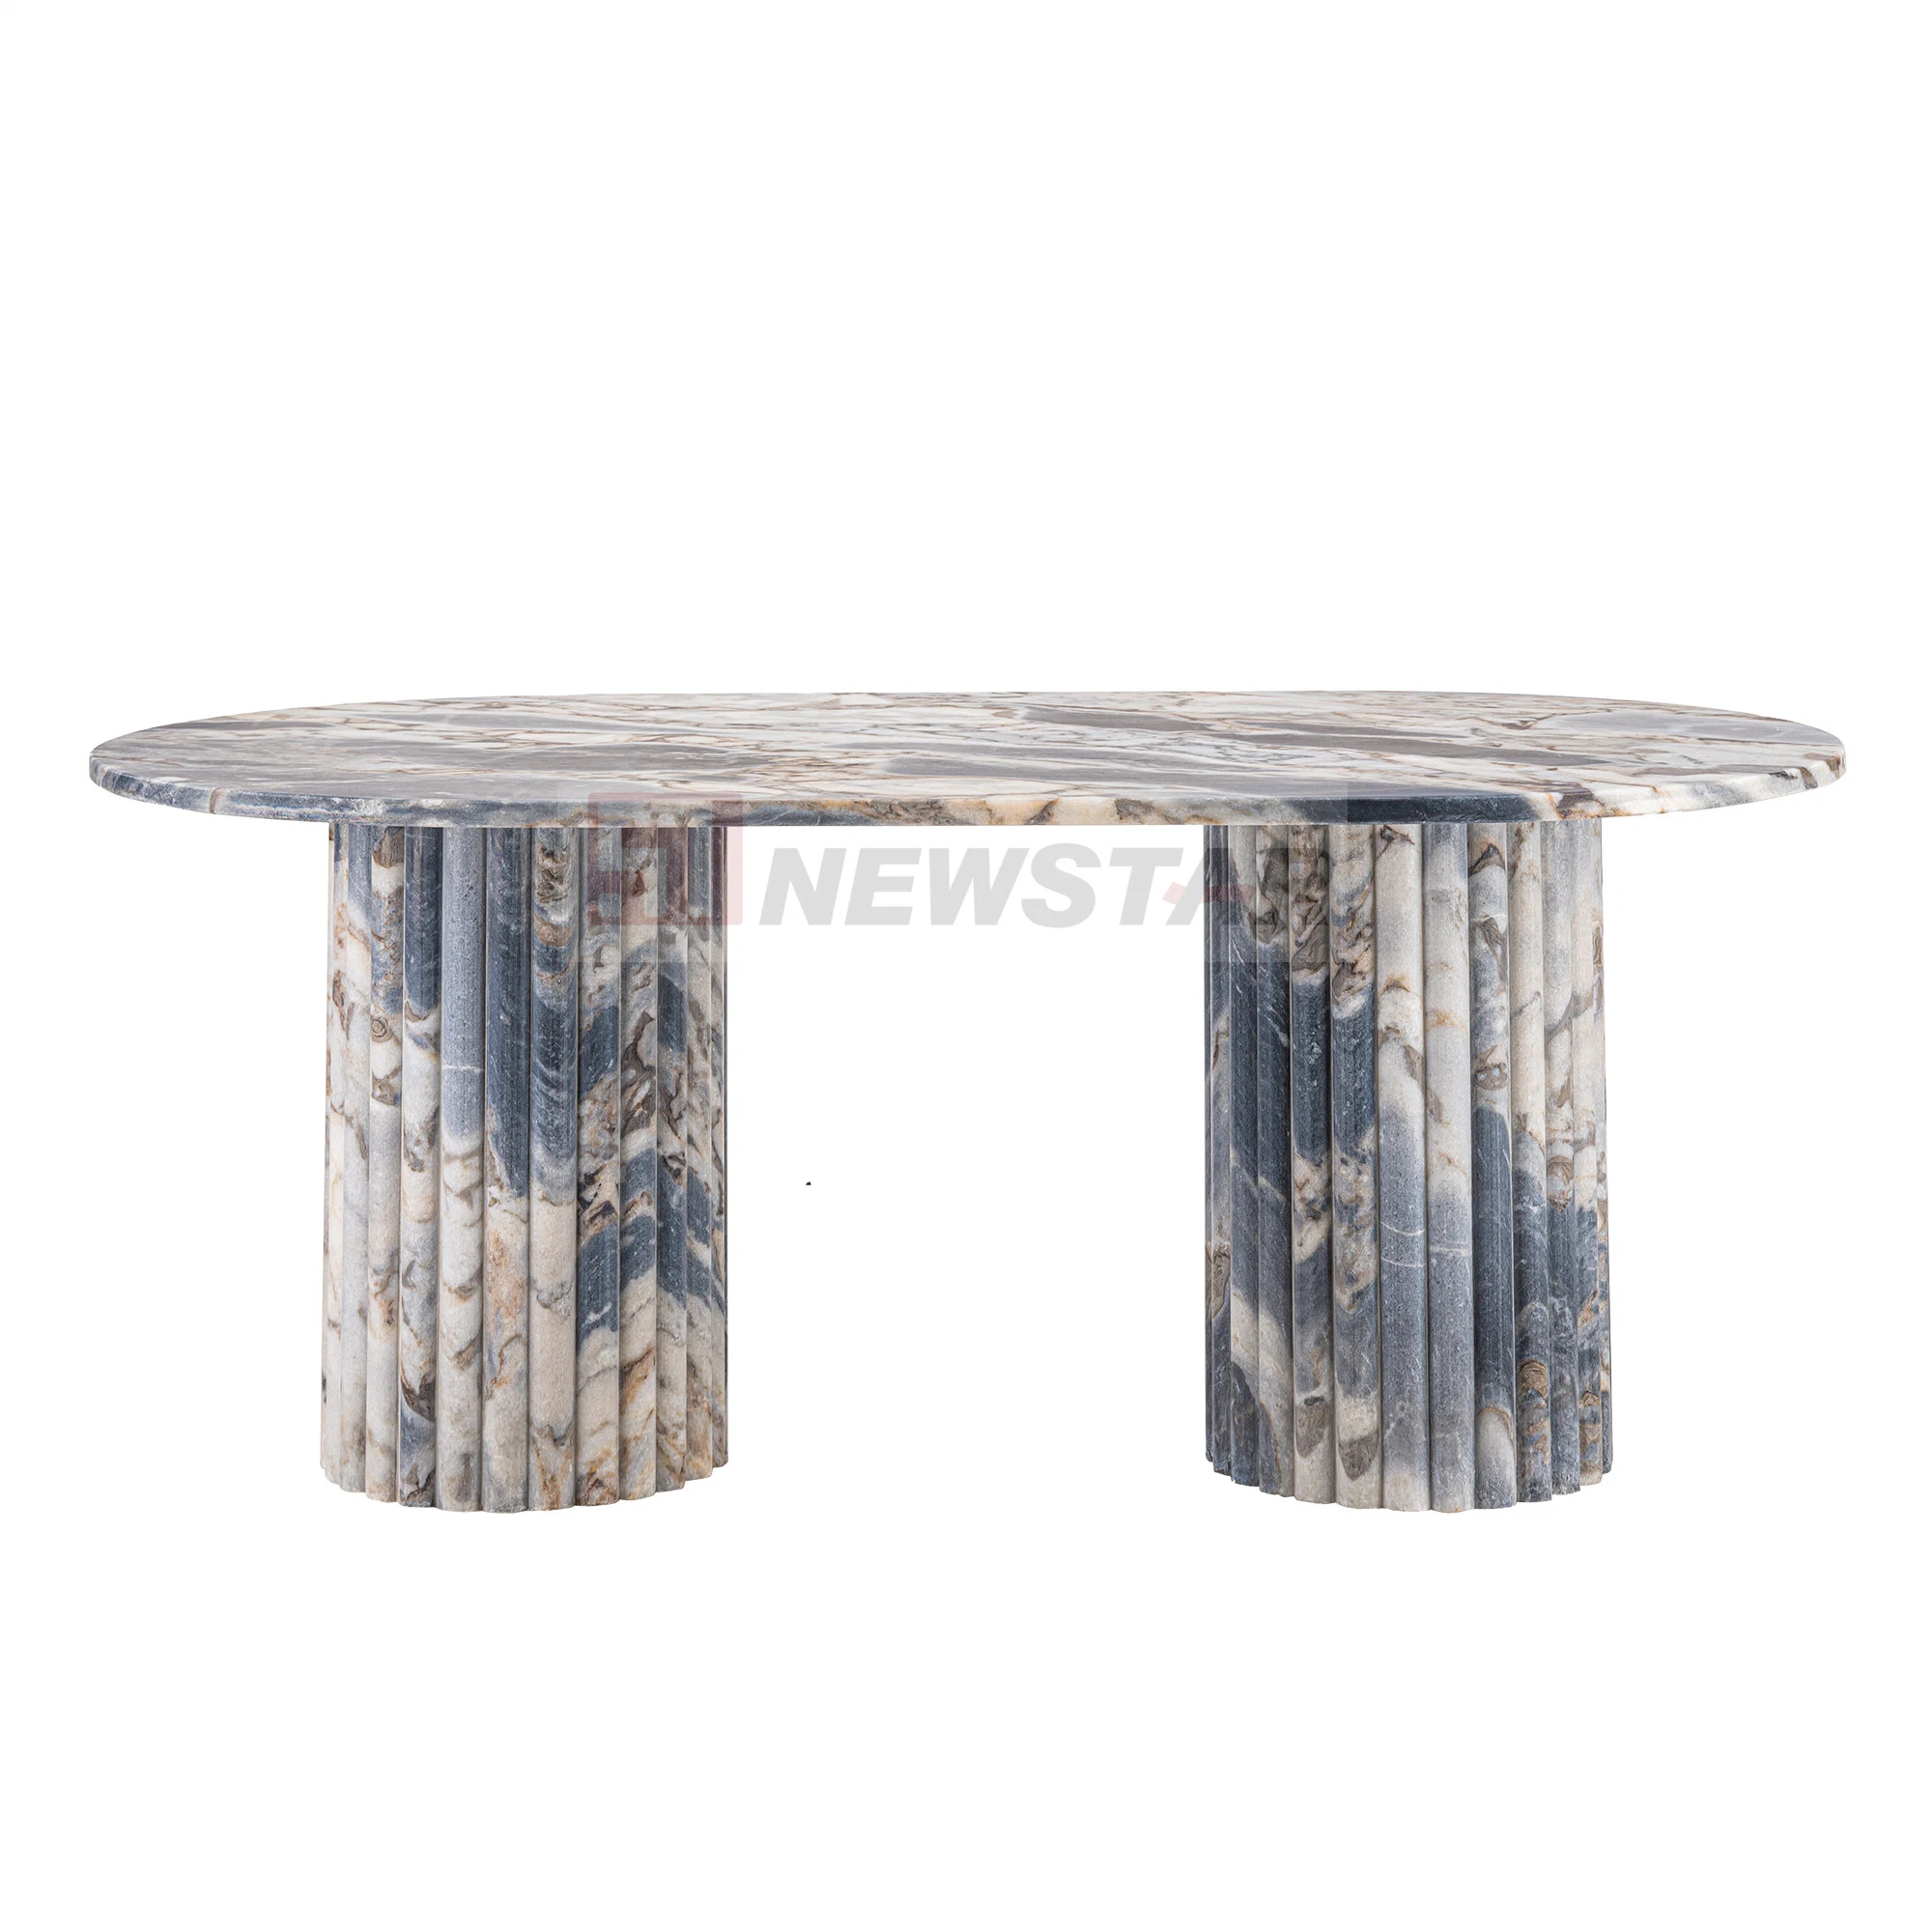 Luxury Home Furniture Marble Coffee Table Unique Design Ribbed Legs Tea Table Living Room Natural Stone Desk Oval Shape